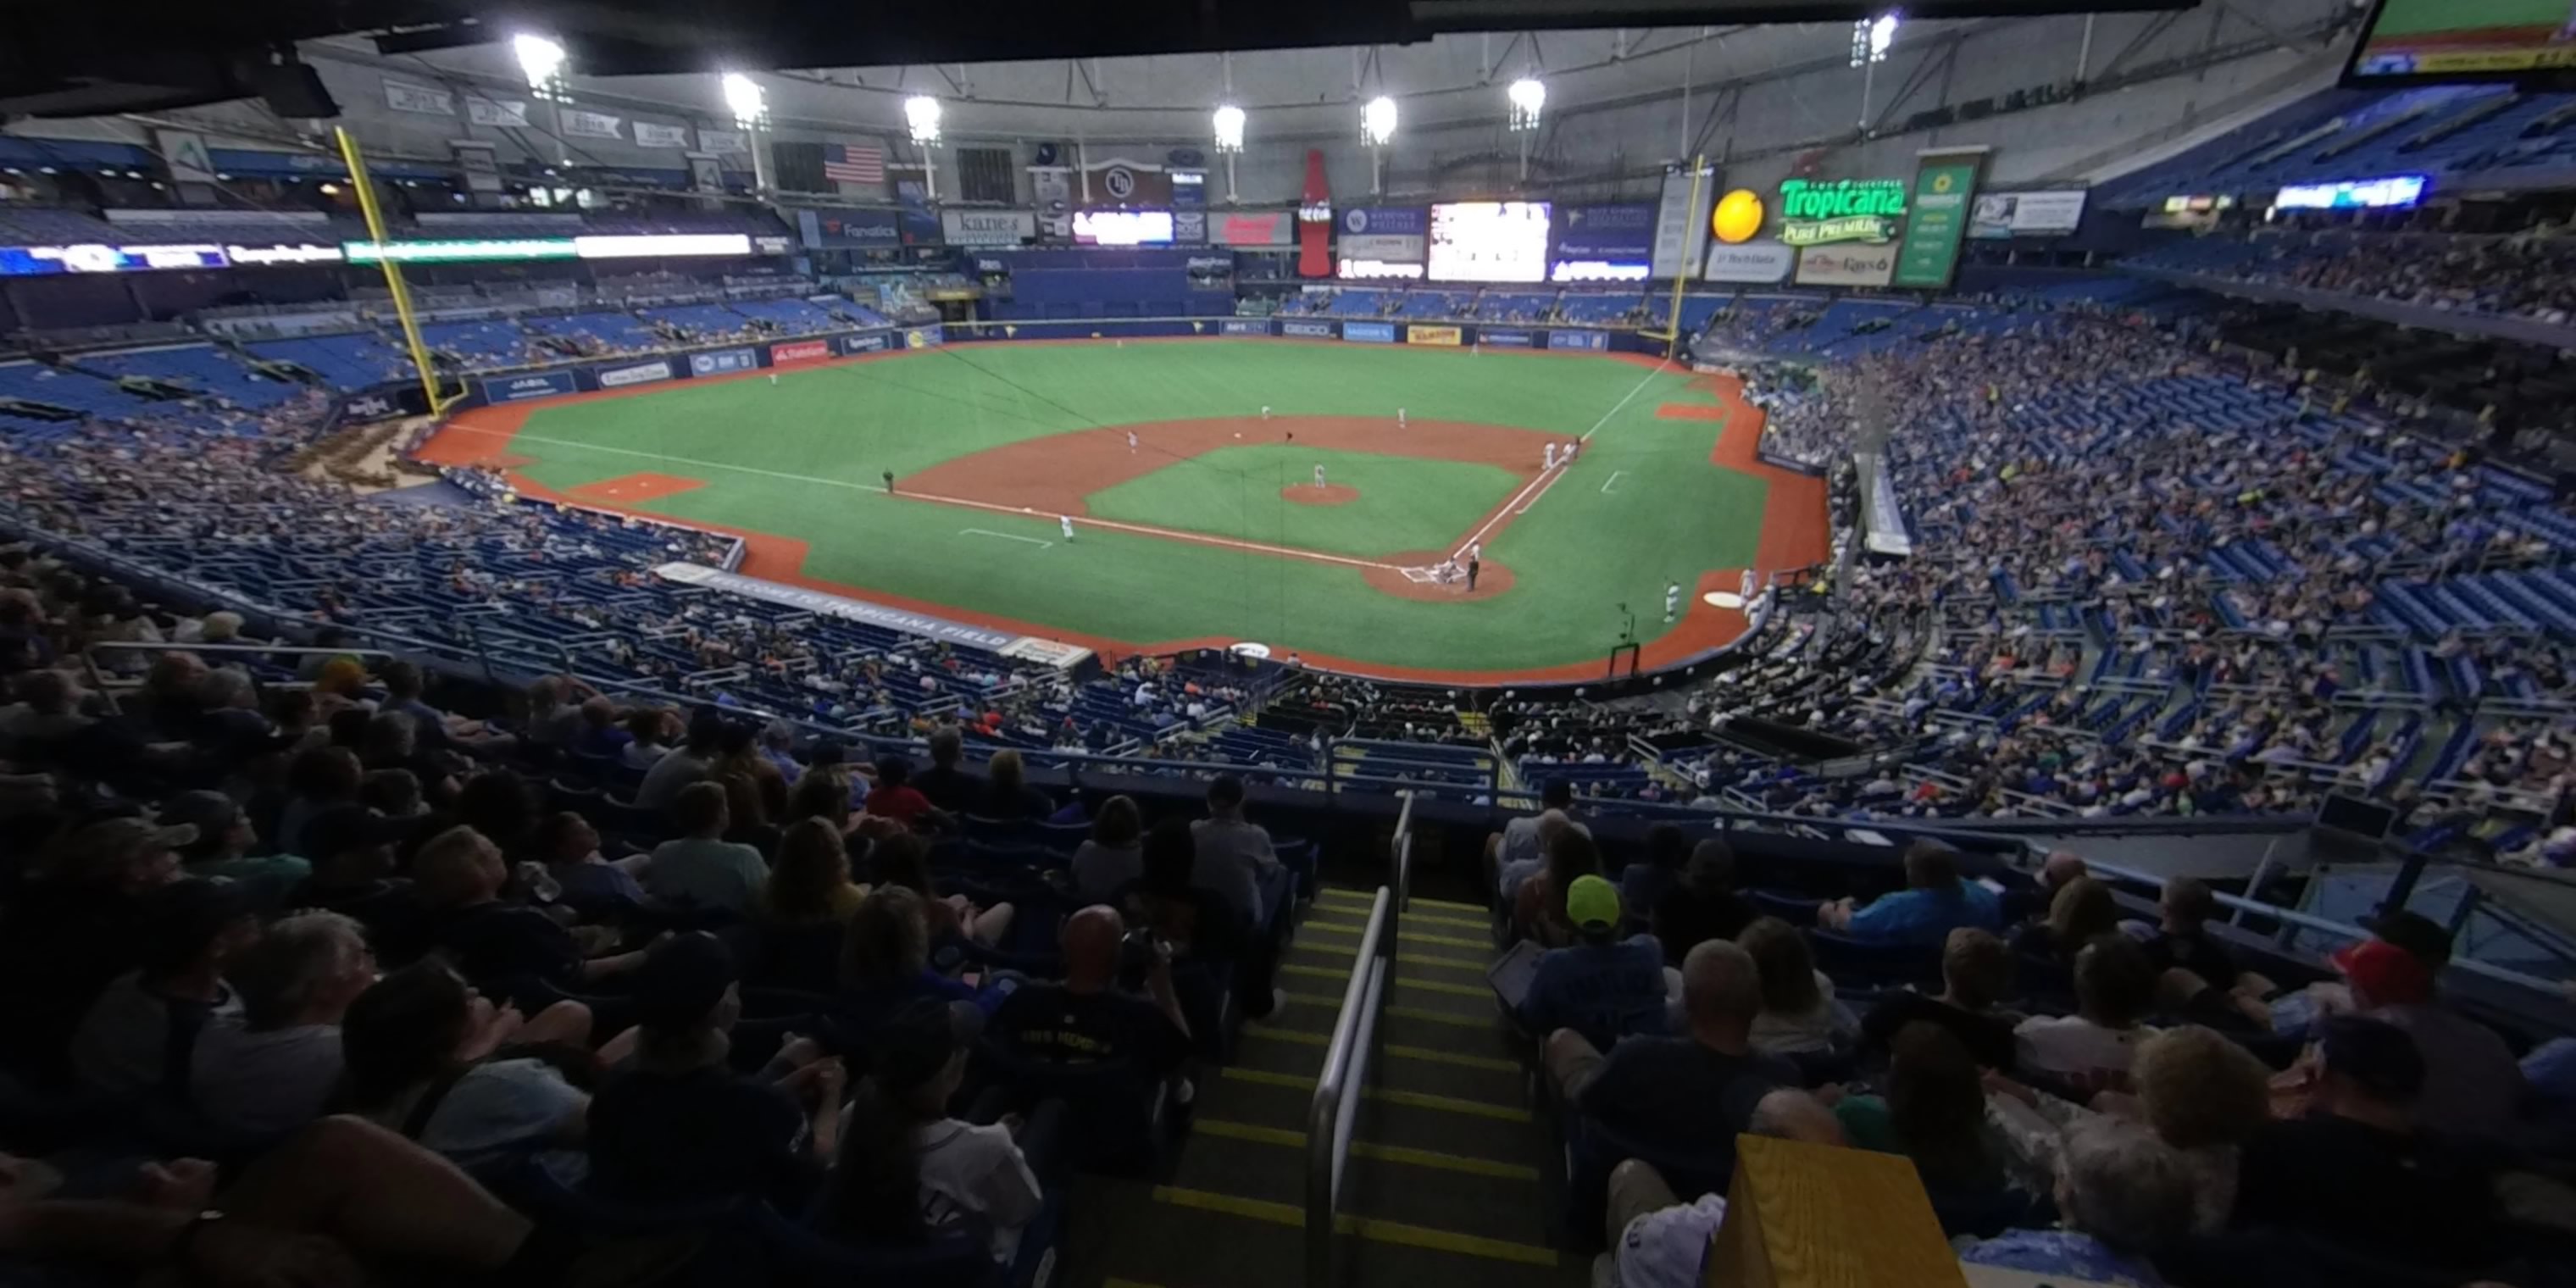 section 205 panoramic seat view  for baseball - tropicana field